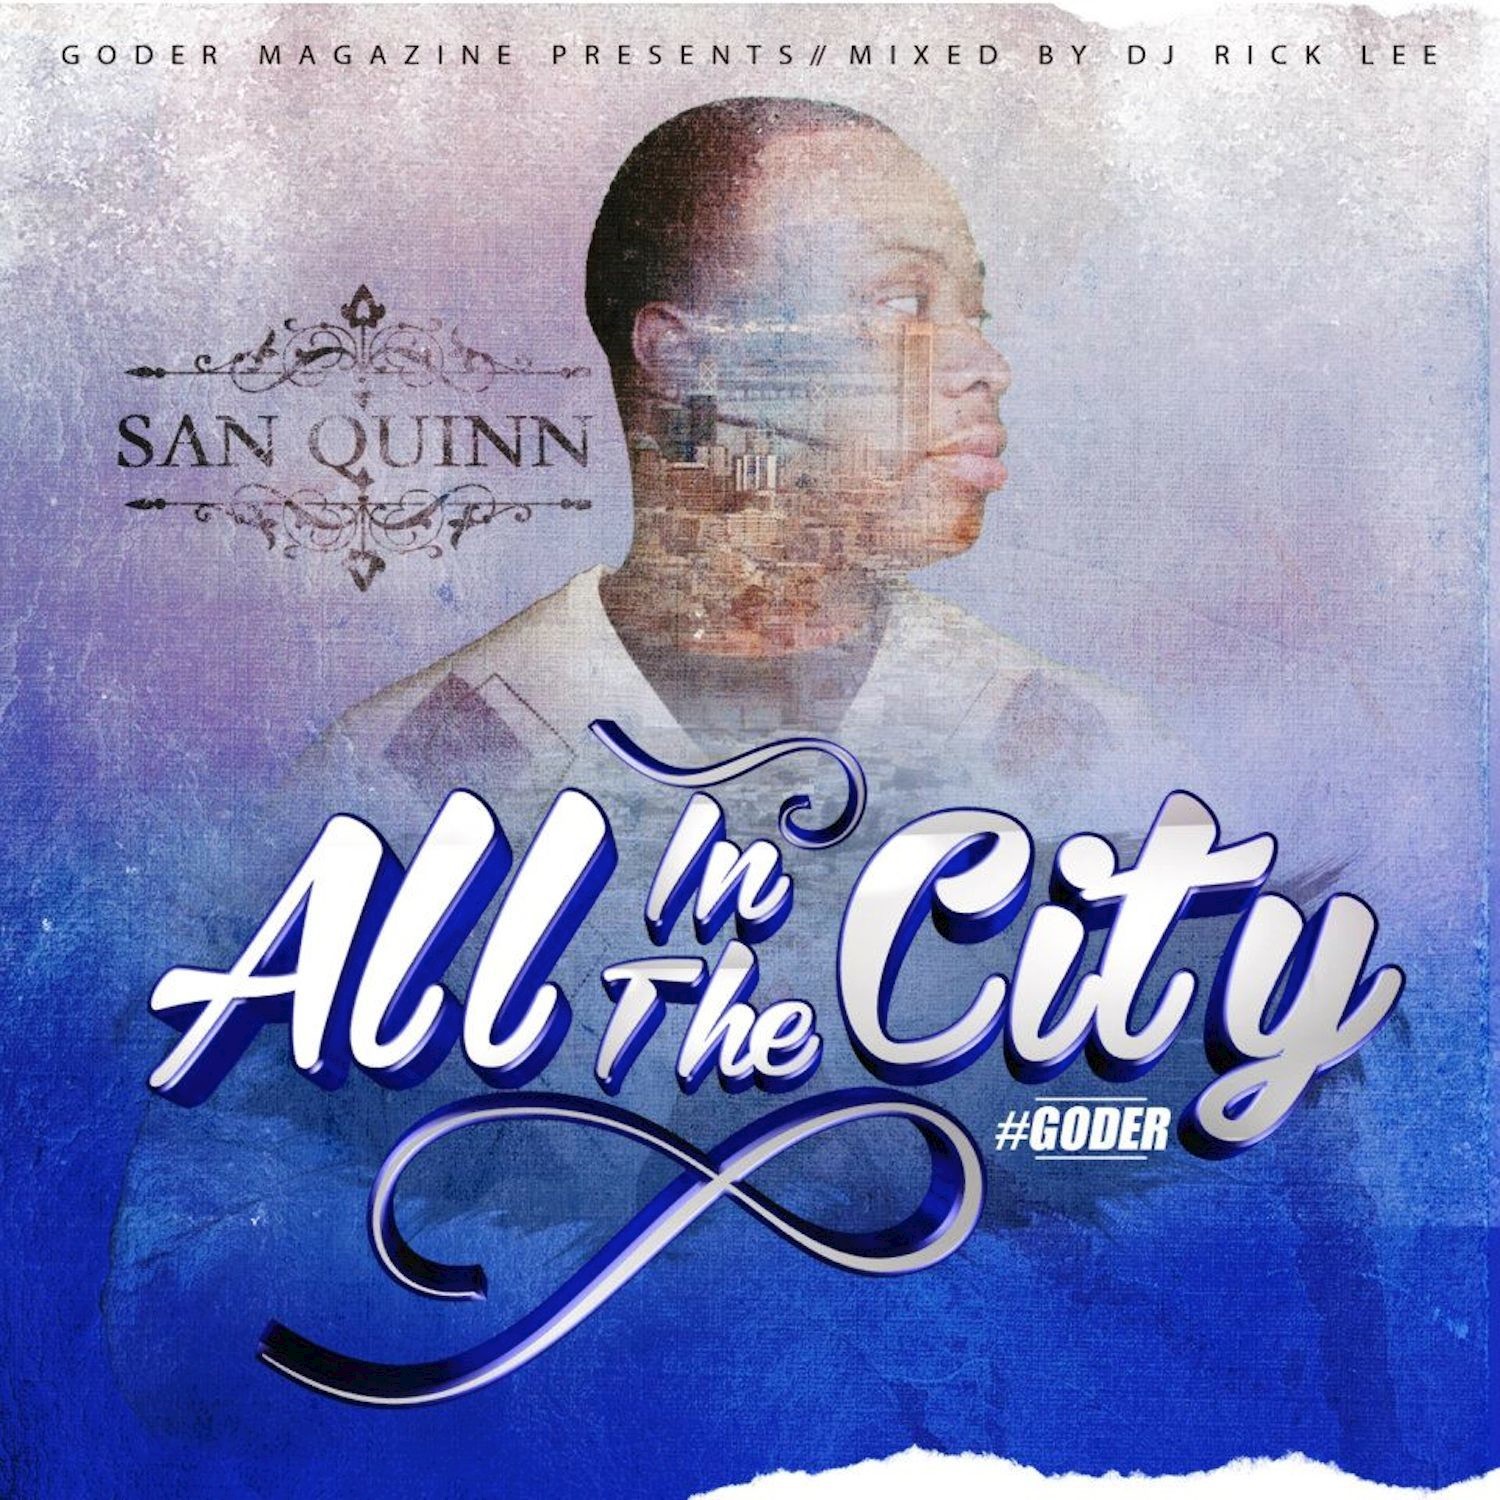 All in the City